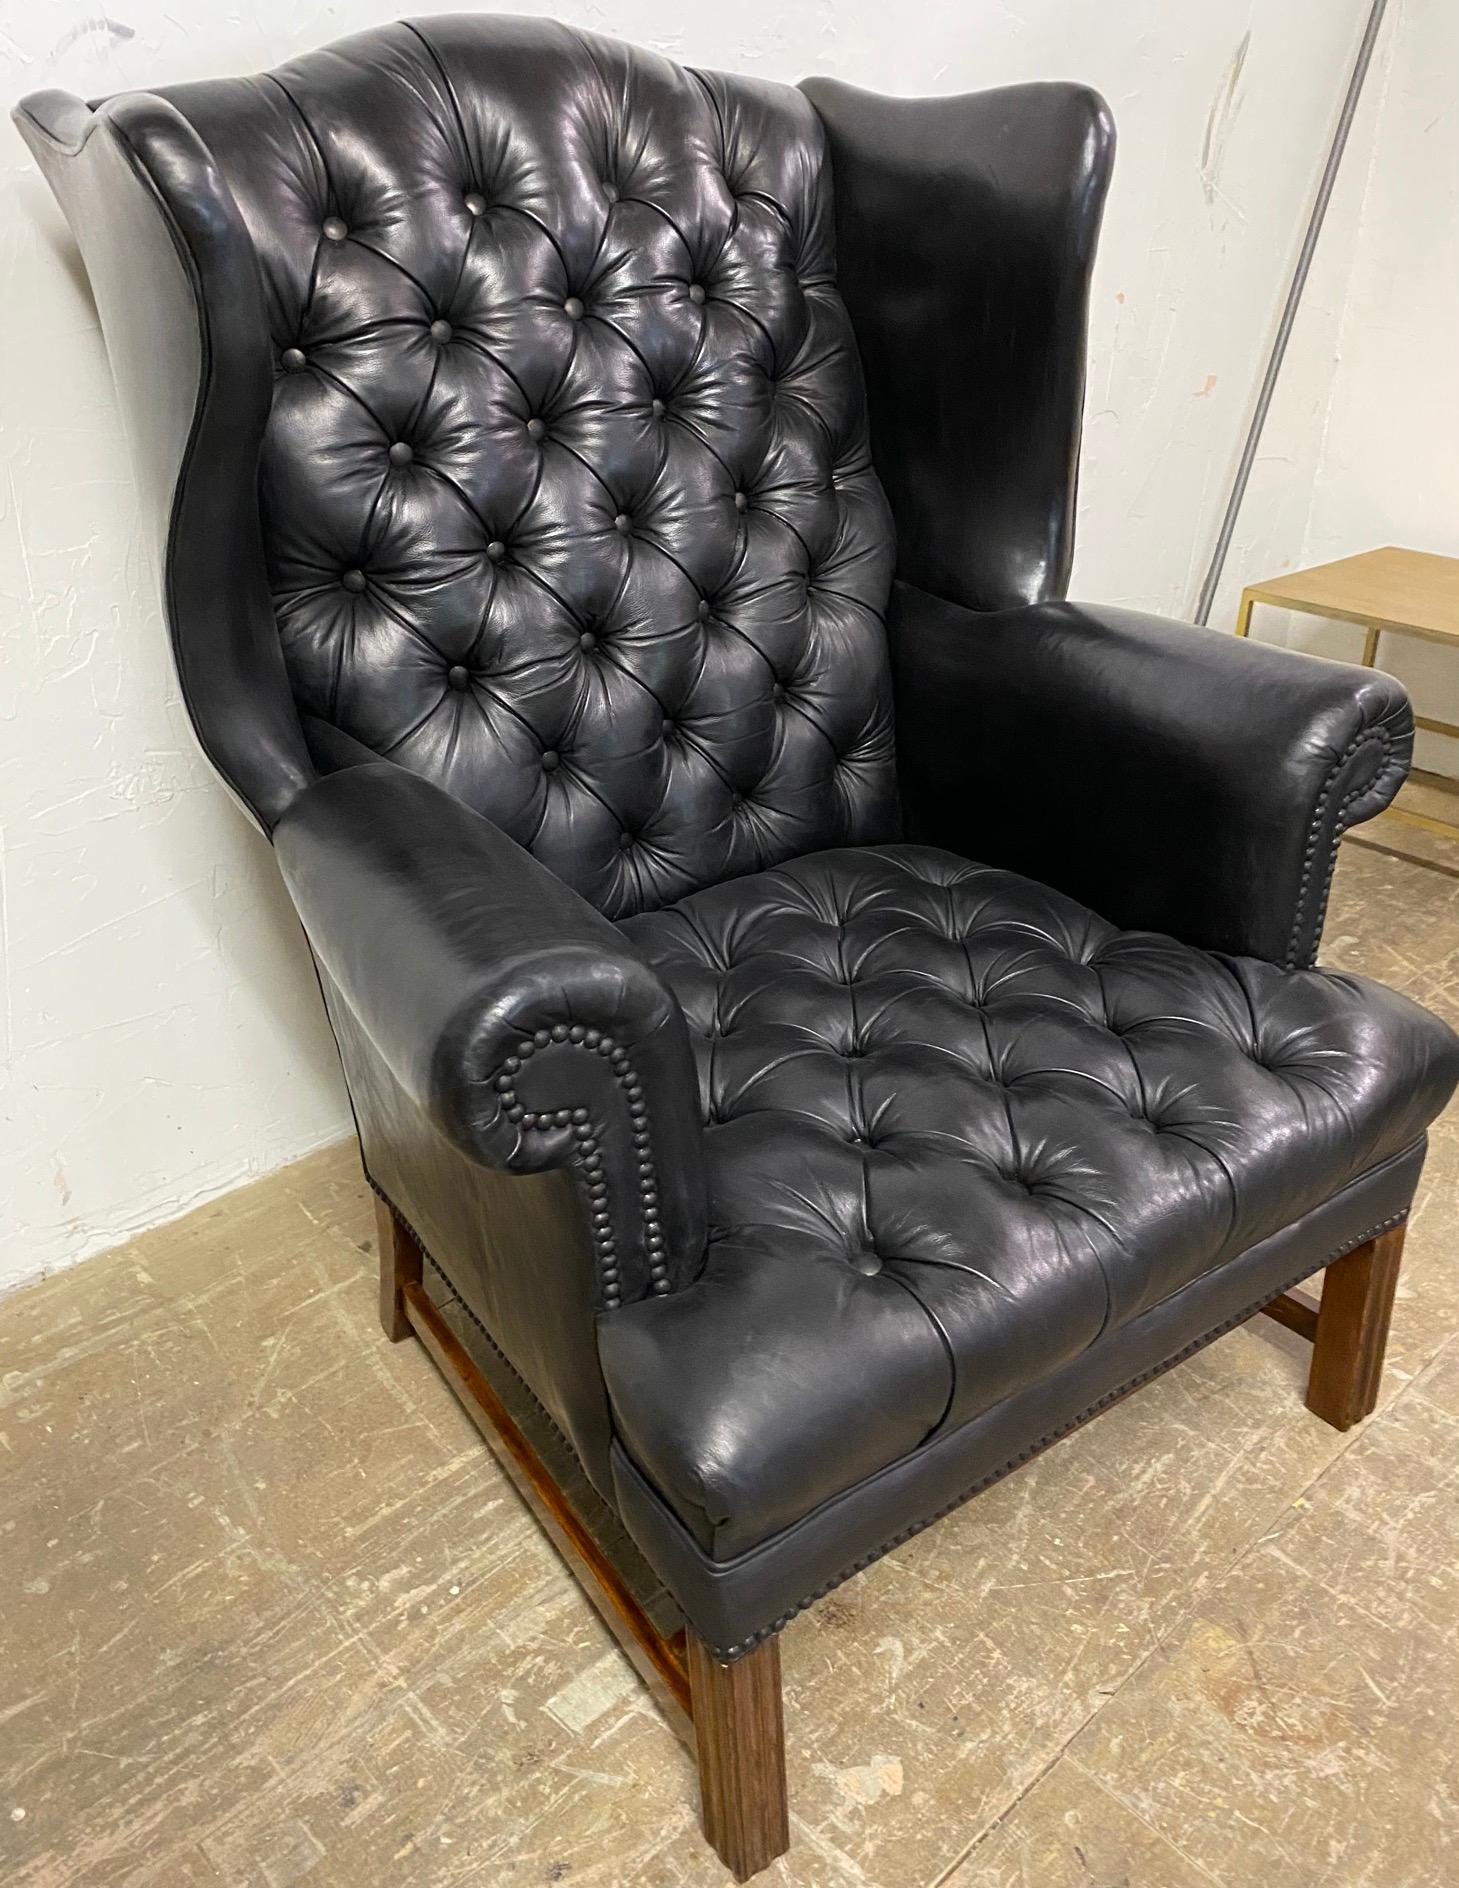 Vintage George III style black tufted leather wing back armchair with a deep buttoned back. Comfortable with good back support. 
Measures: Arm height: 26